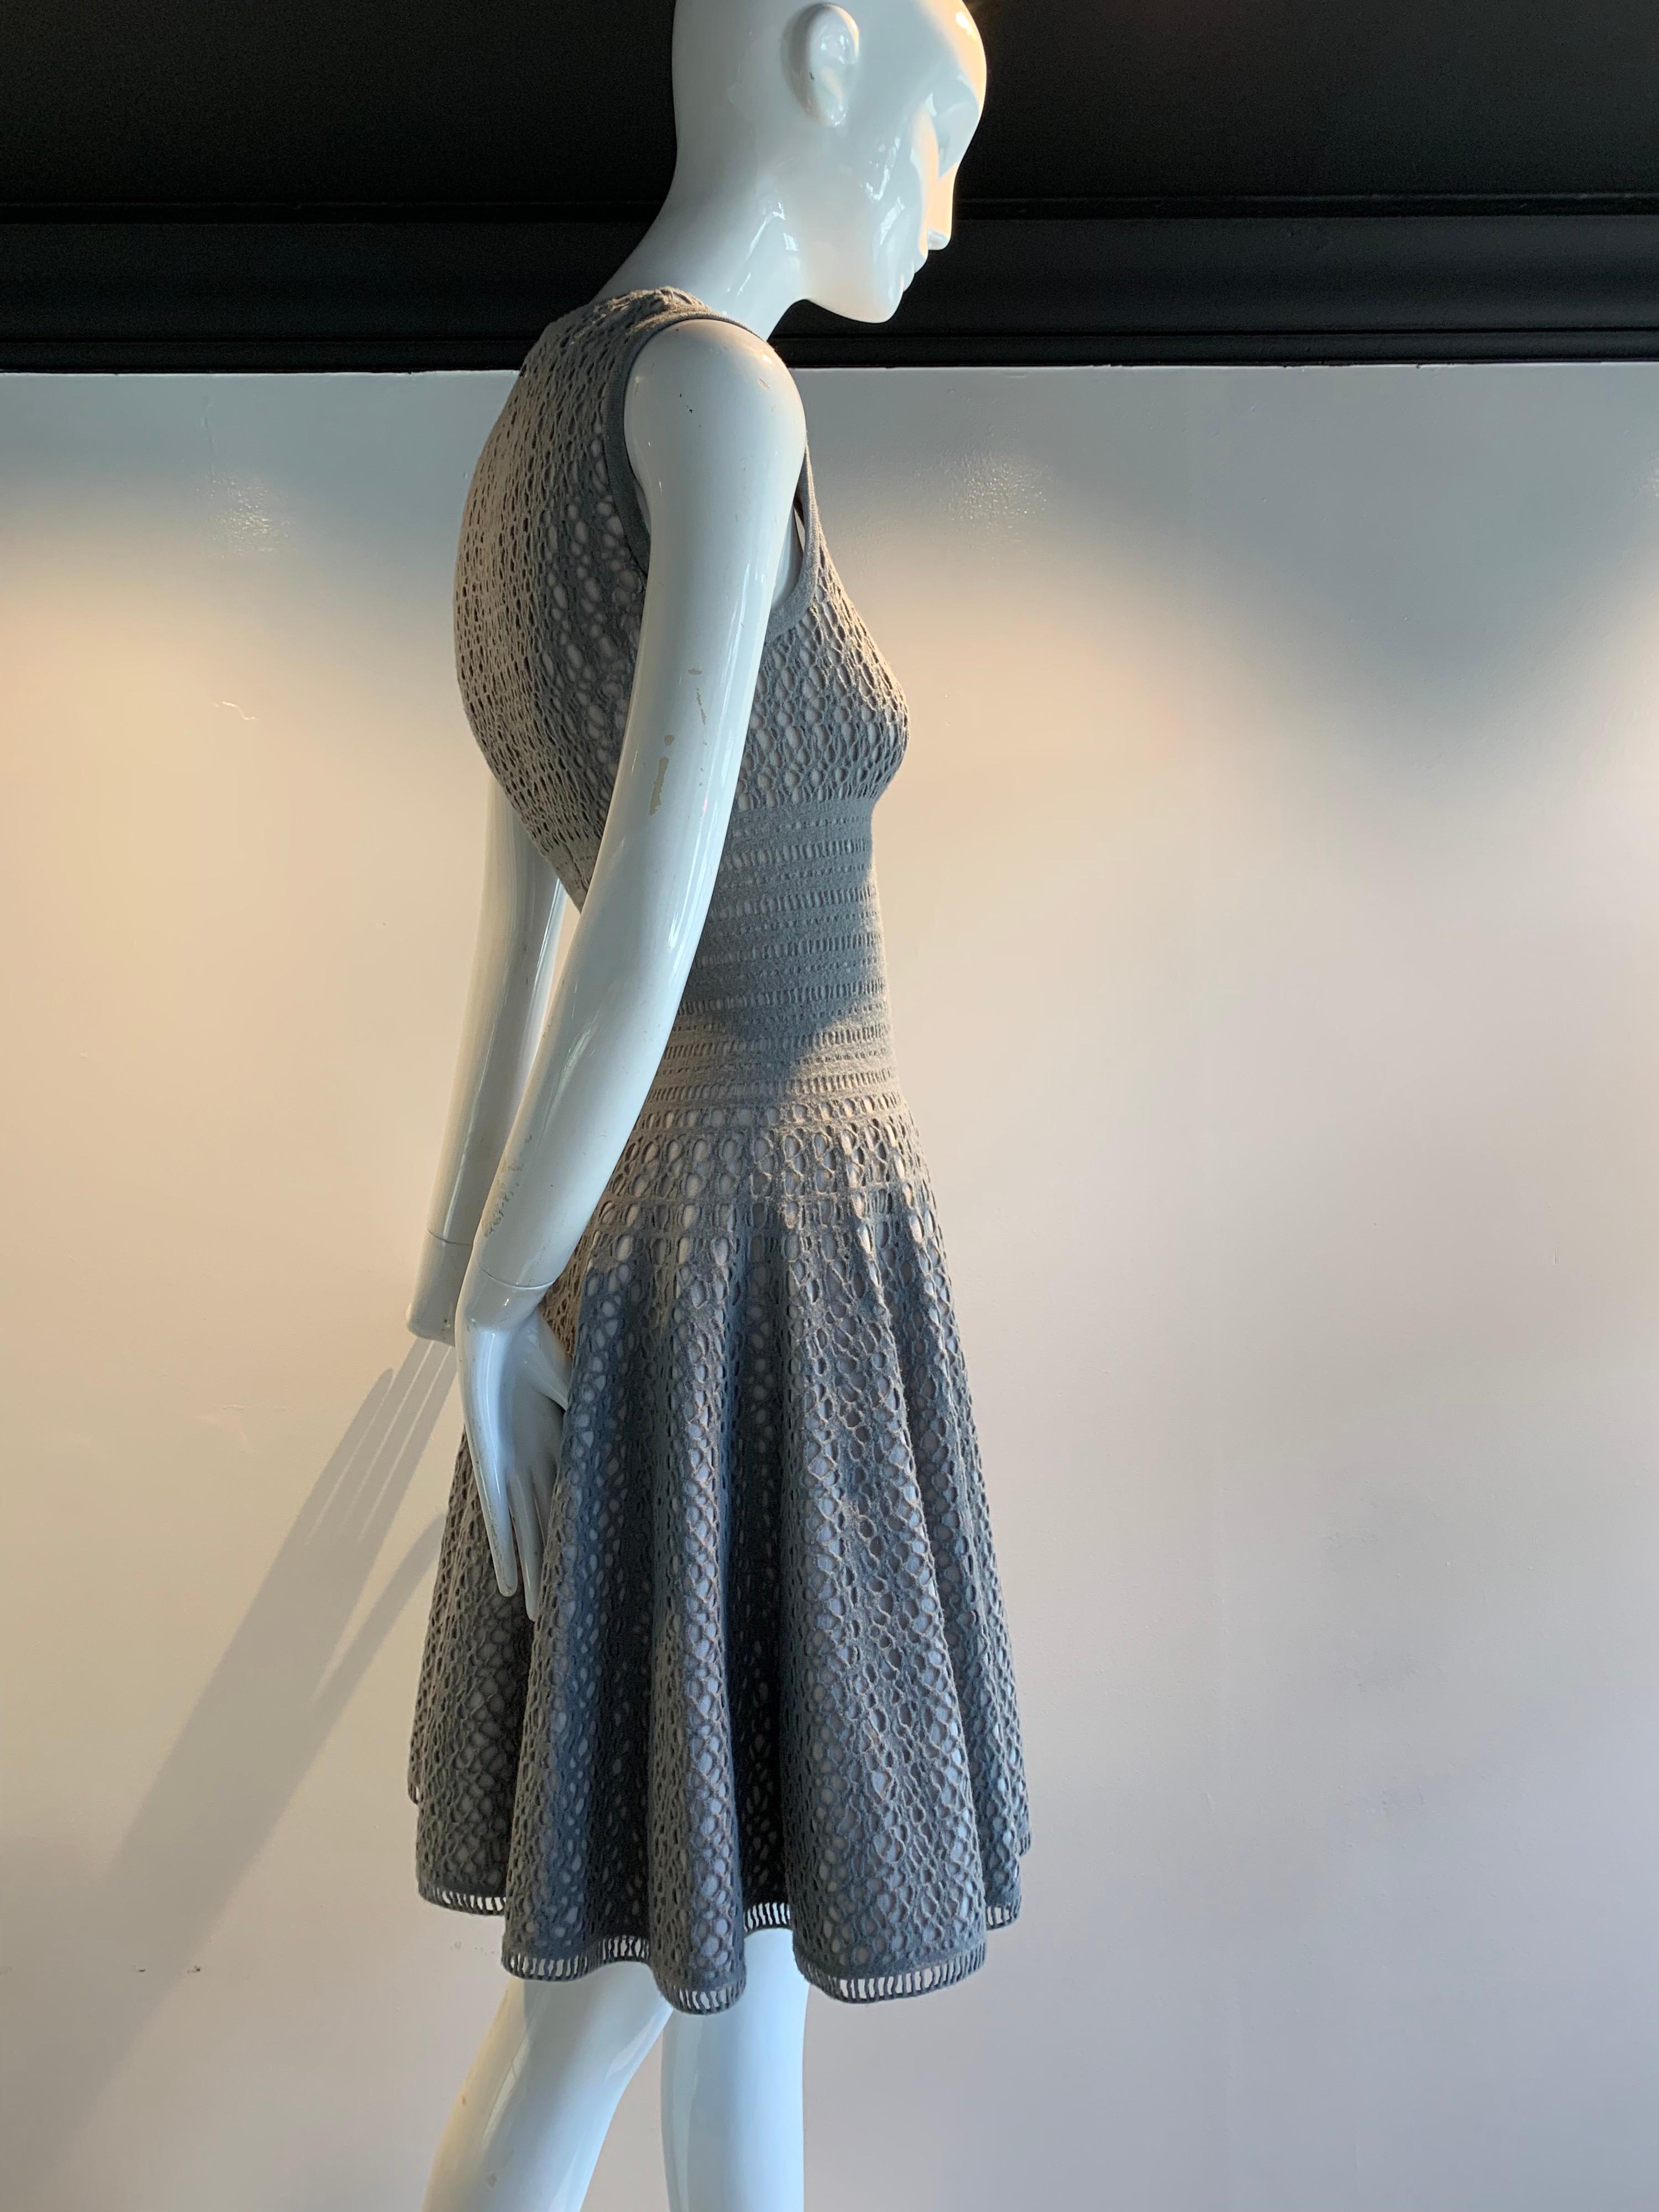 Vintage Azzedine Alaia Dove Grey Signature Elastic Open-Knit Wool-Blend Day Dress. Bodice is fitted and cost-conscious, with a squared neckline. Skirt is full and flared. No closures. Pull over style. Fully lined. French size 38.